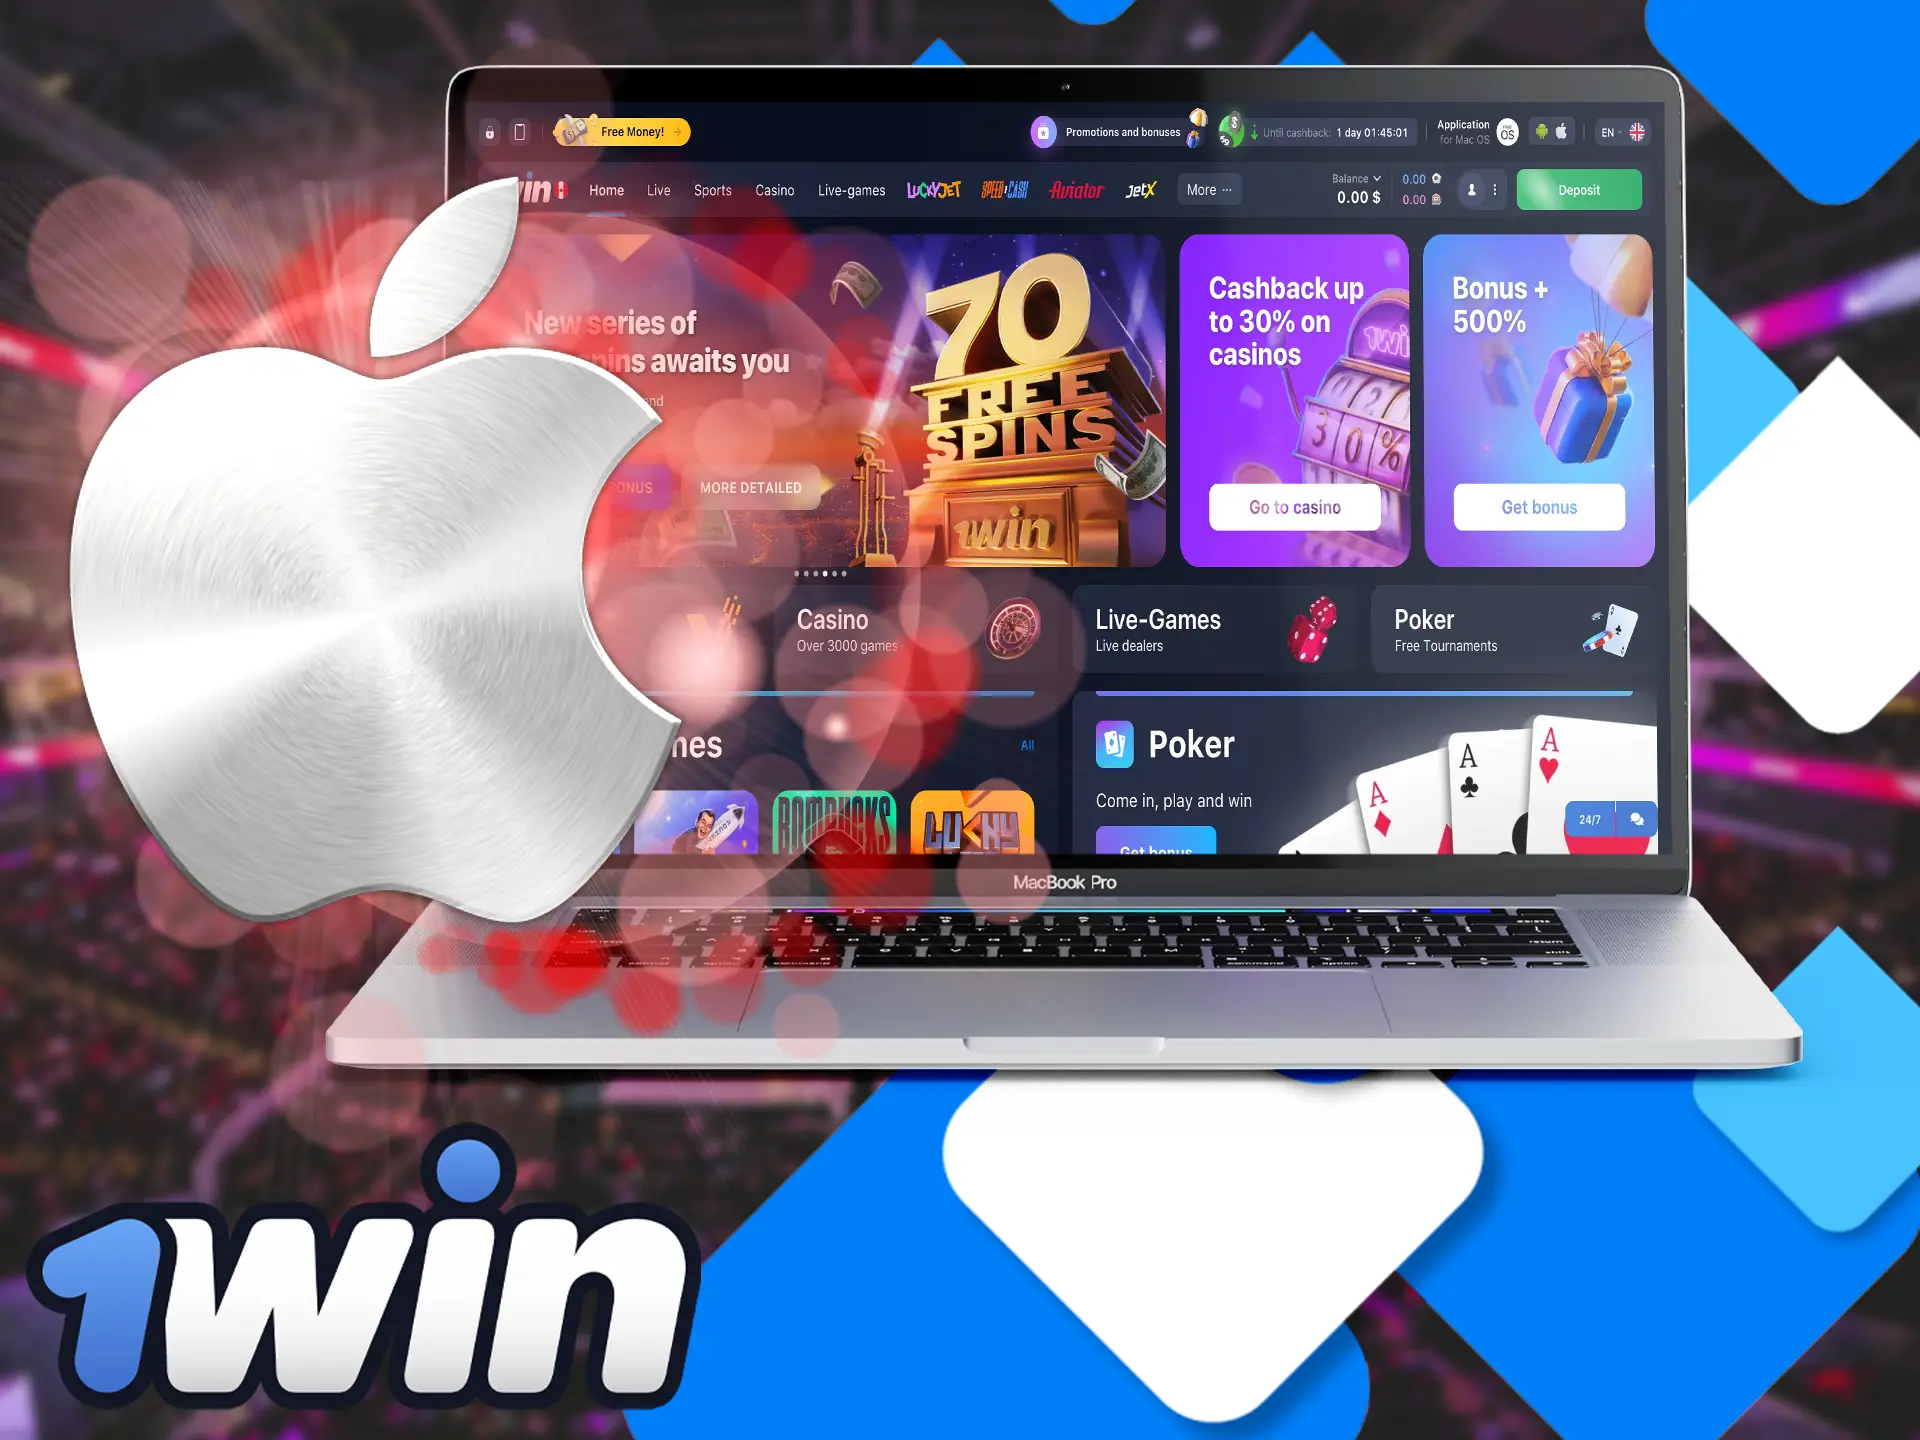 If you are looking for variations on how to play on the apple platform, then our guide will help with installing the official 1Win app.